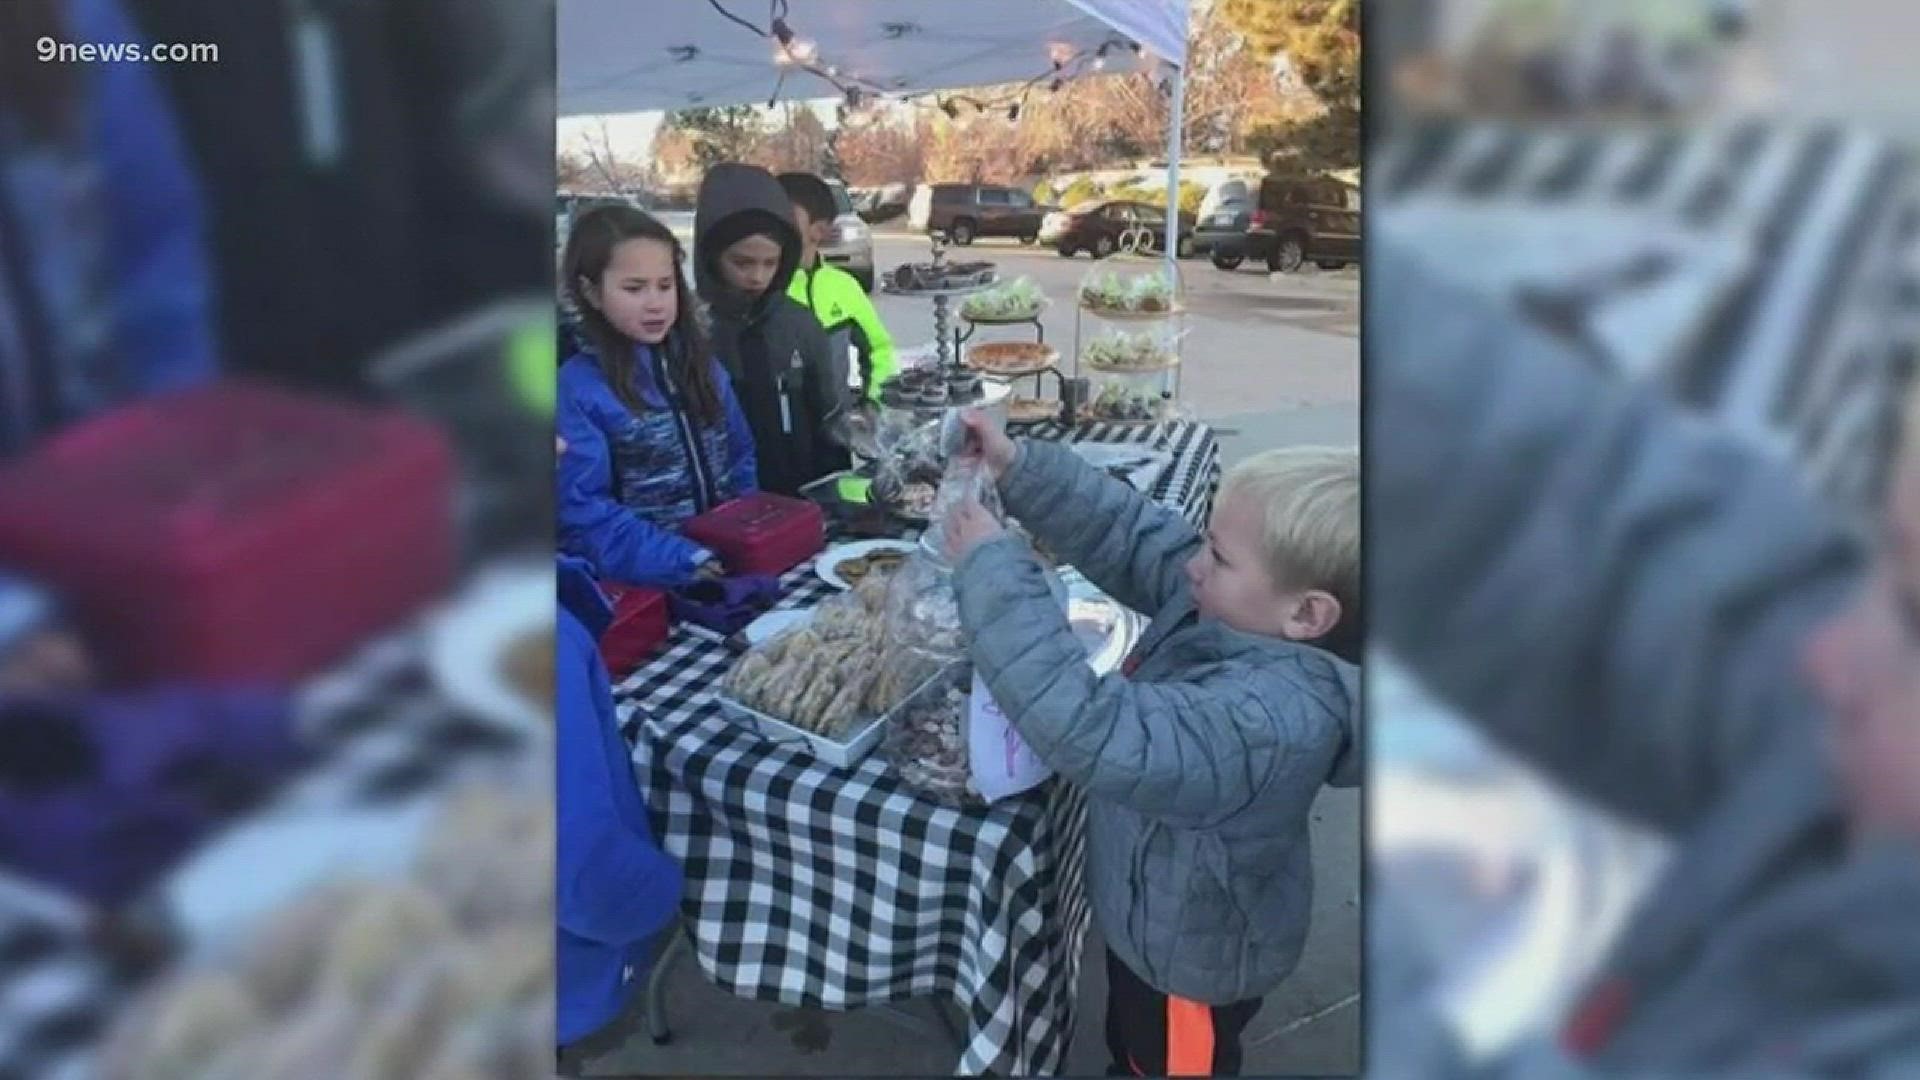 More than 20 Colorado kids helped run a bake sale on Monday benefiting victims of the deadly wildfires burning in Northern California.